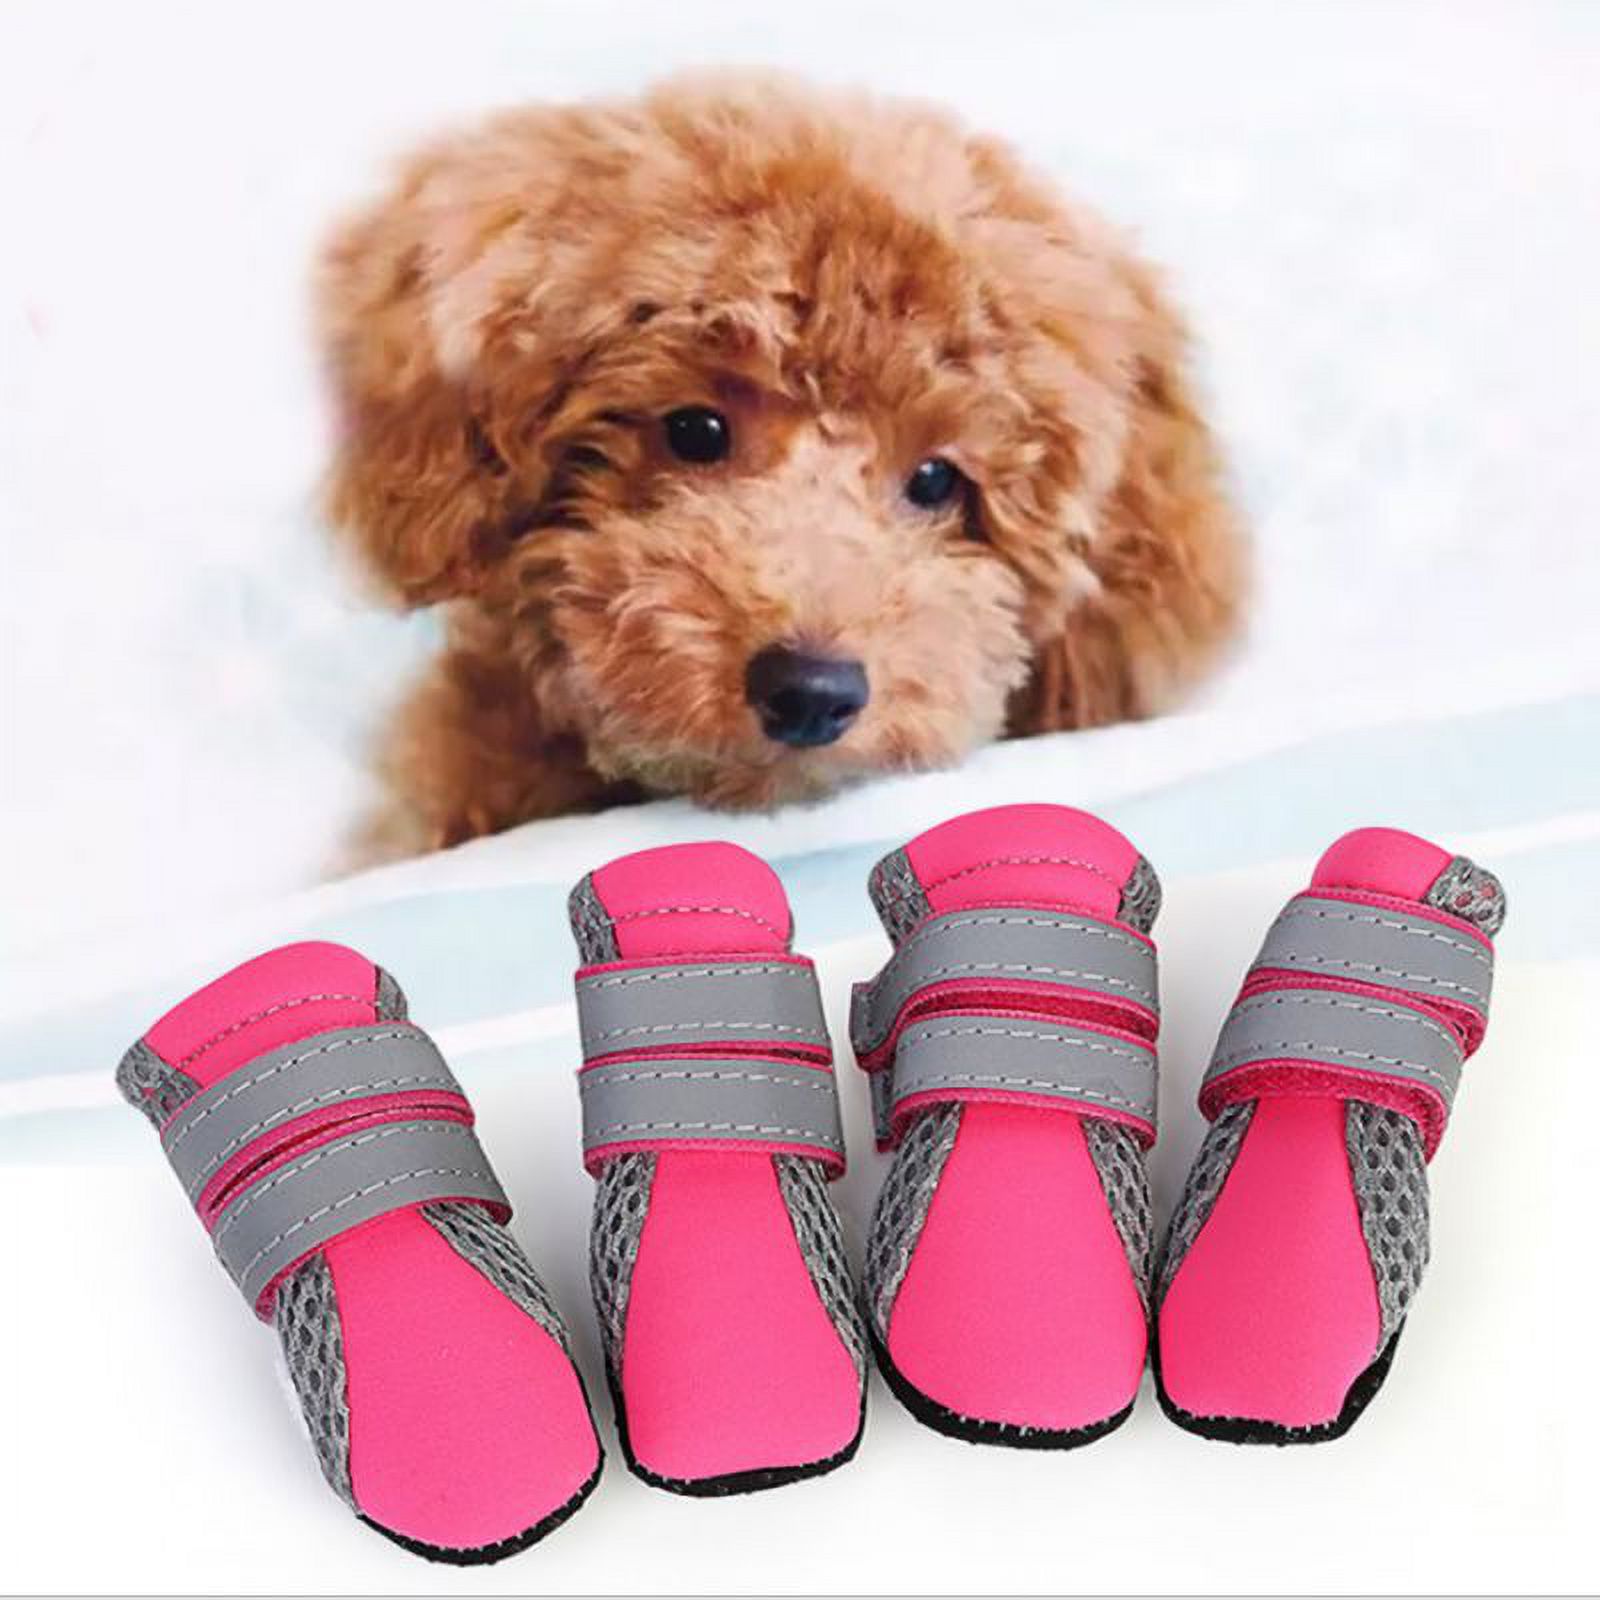 4 Pcs Waterproof Dogs Boots Anti-Slip Sole Feet Cover Paw Protectors Shoes - image 1 of 2